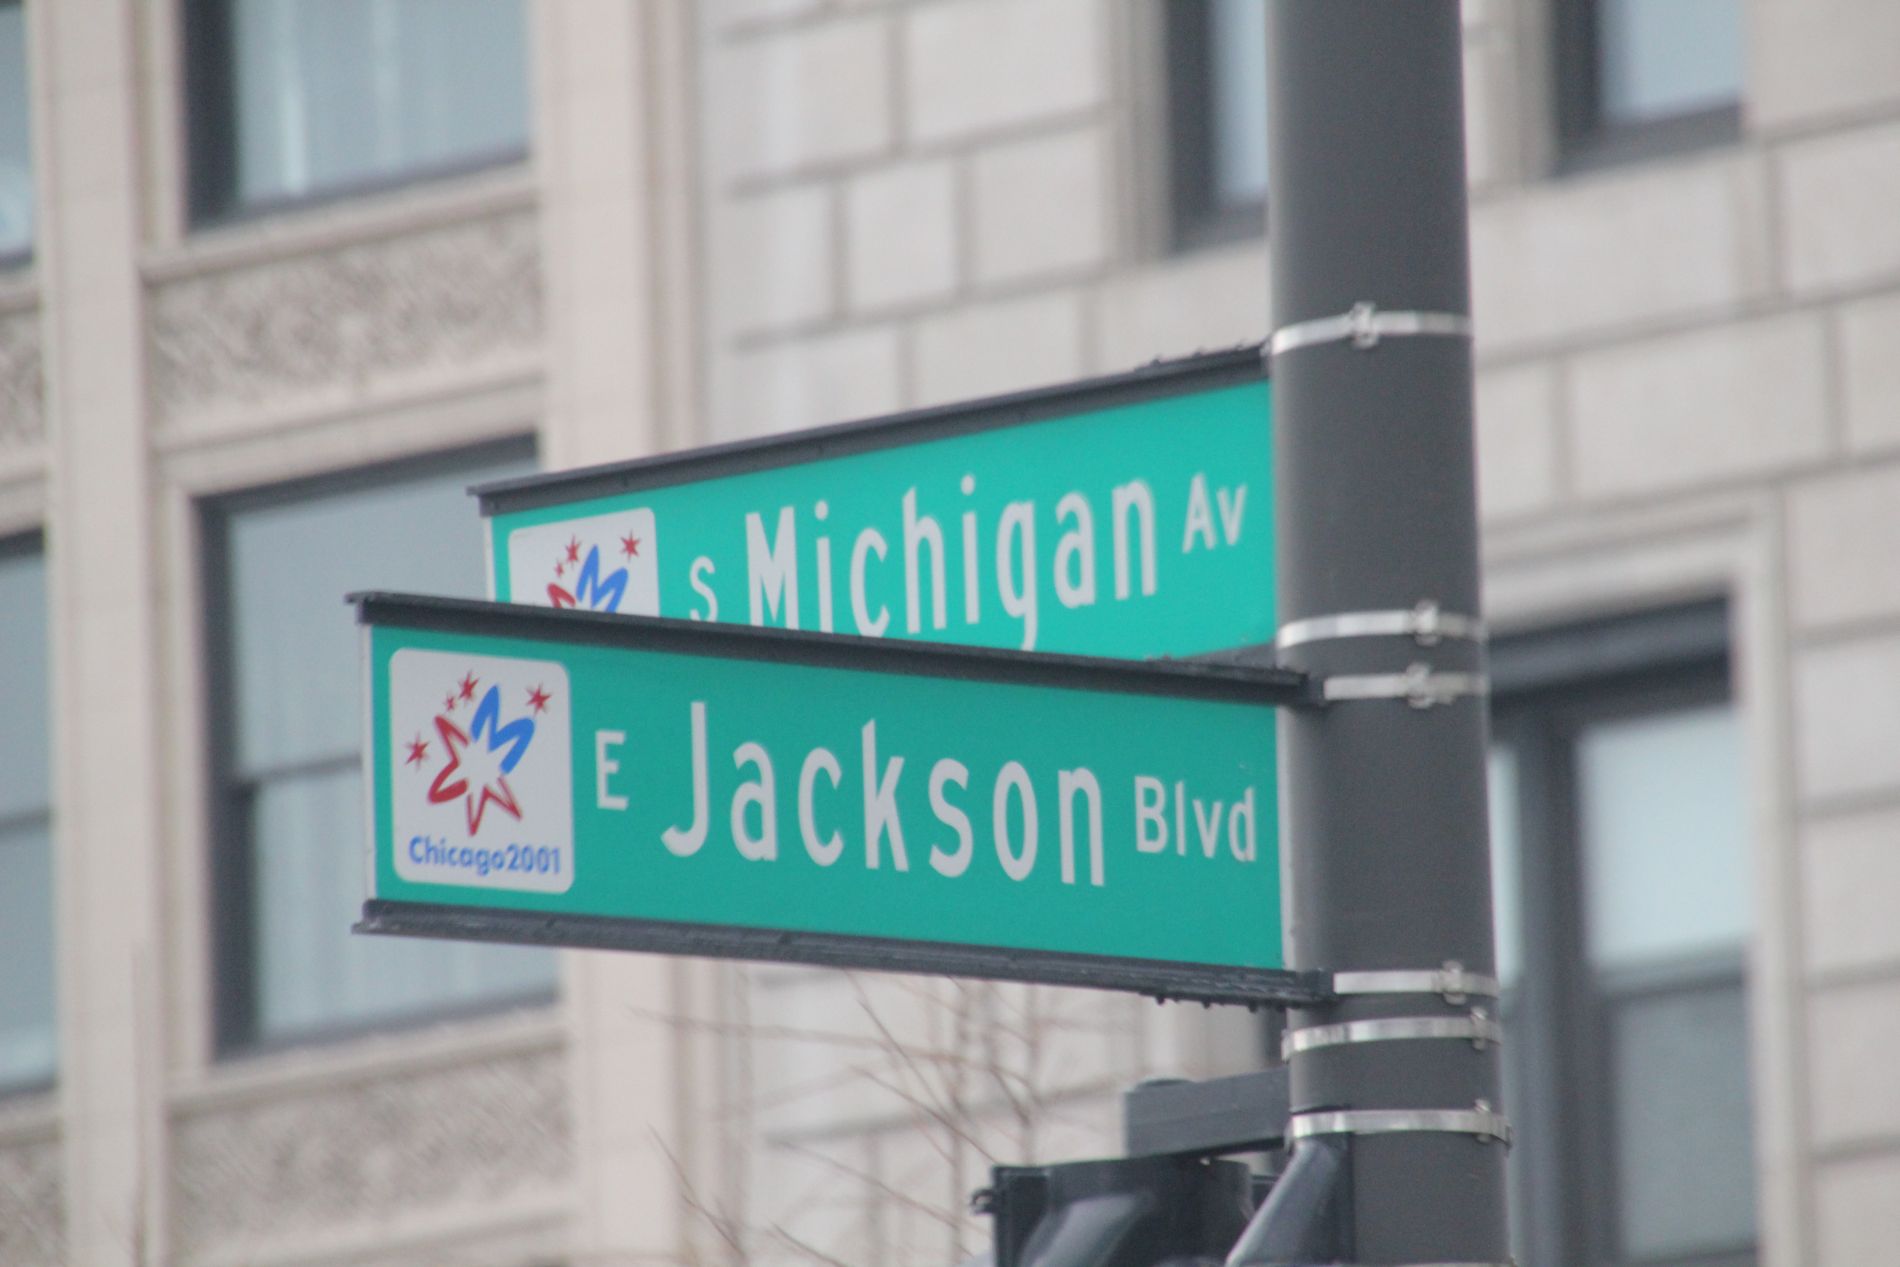 Chicago Michigan and Jackson street signs